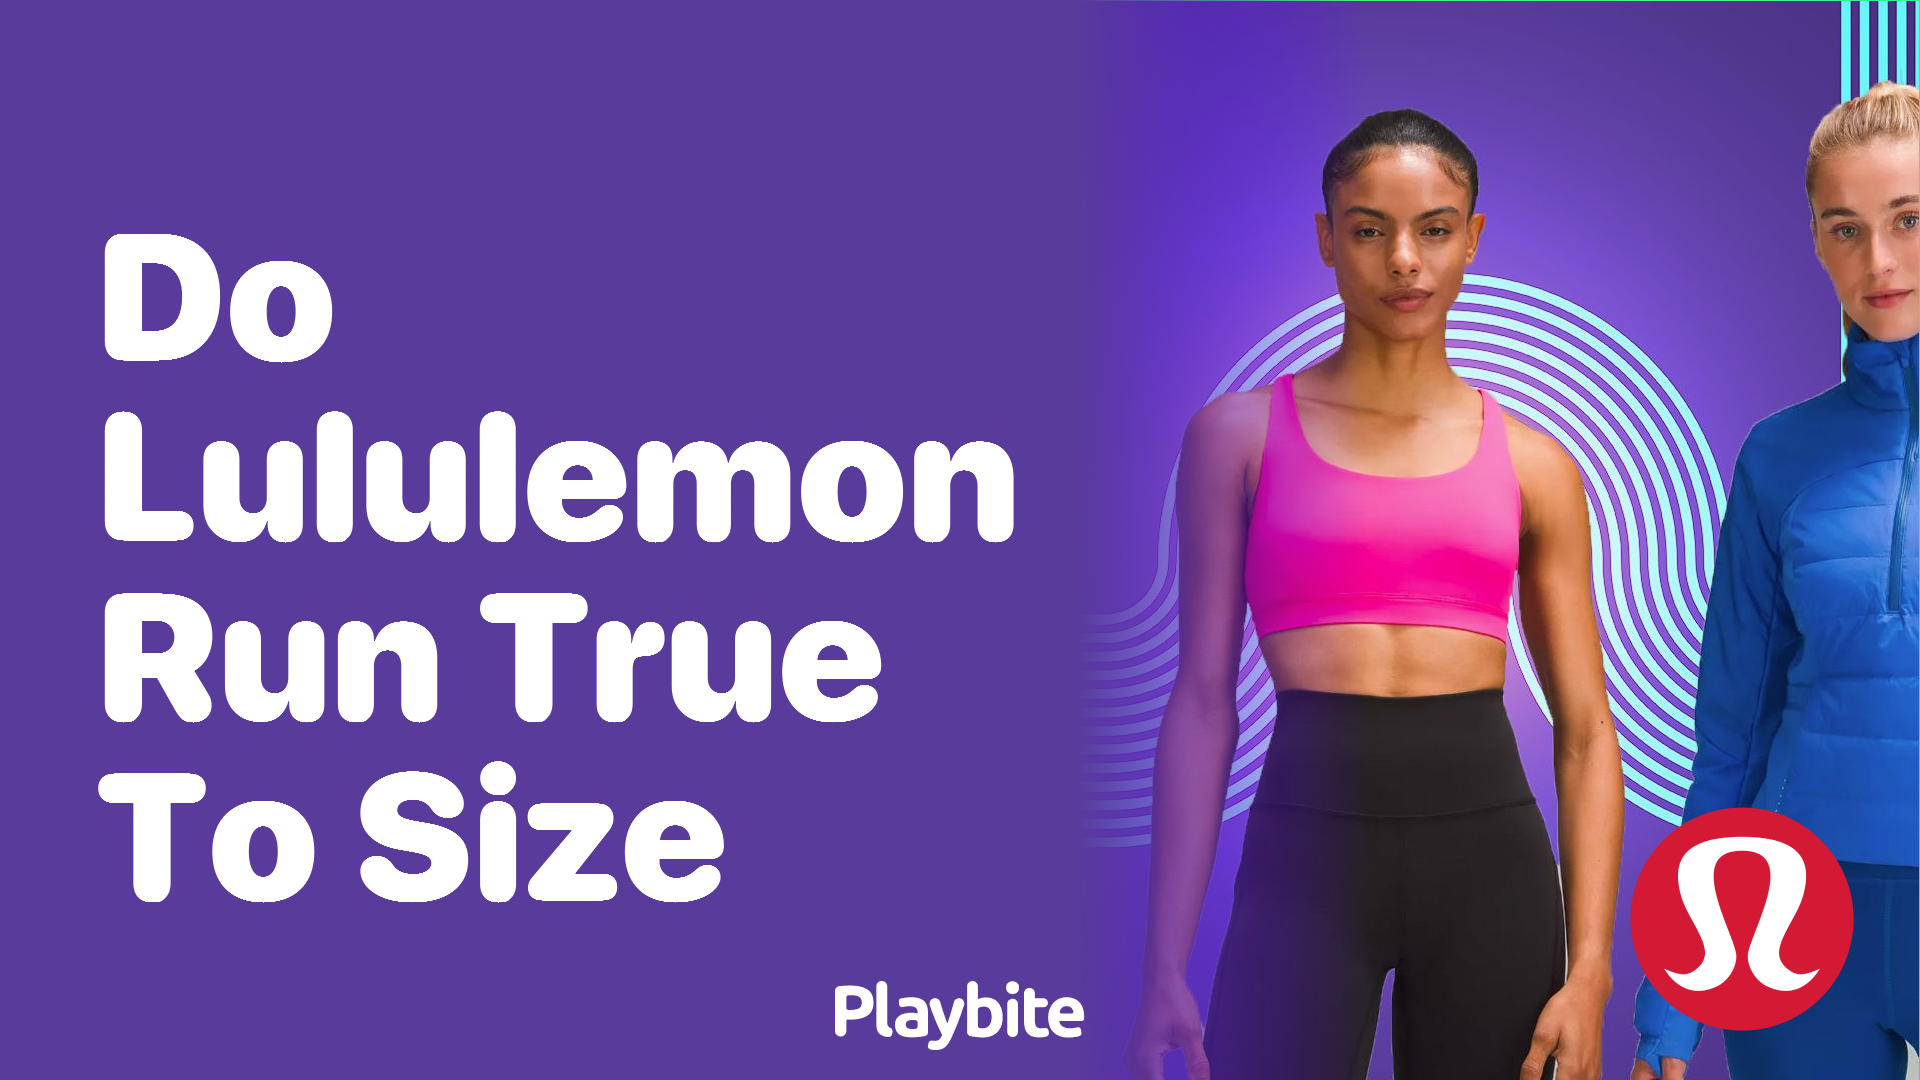 Do Lululemon Clothes Run True to Size? Find Out Here! - Playbite